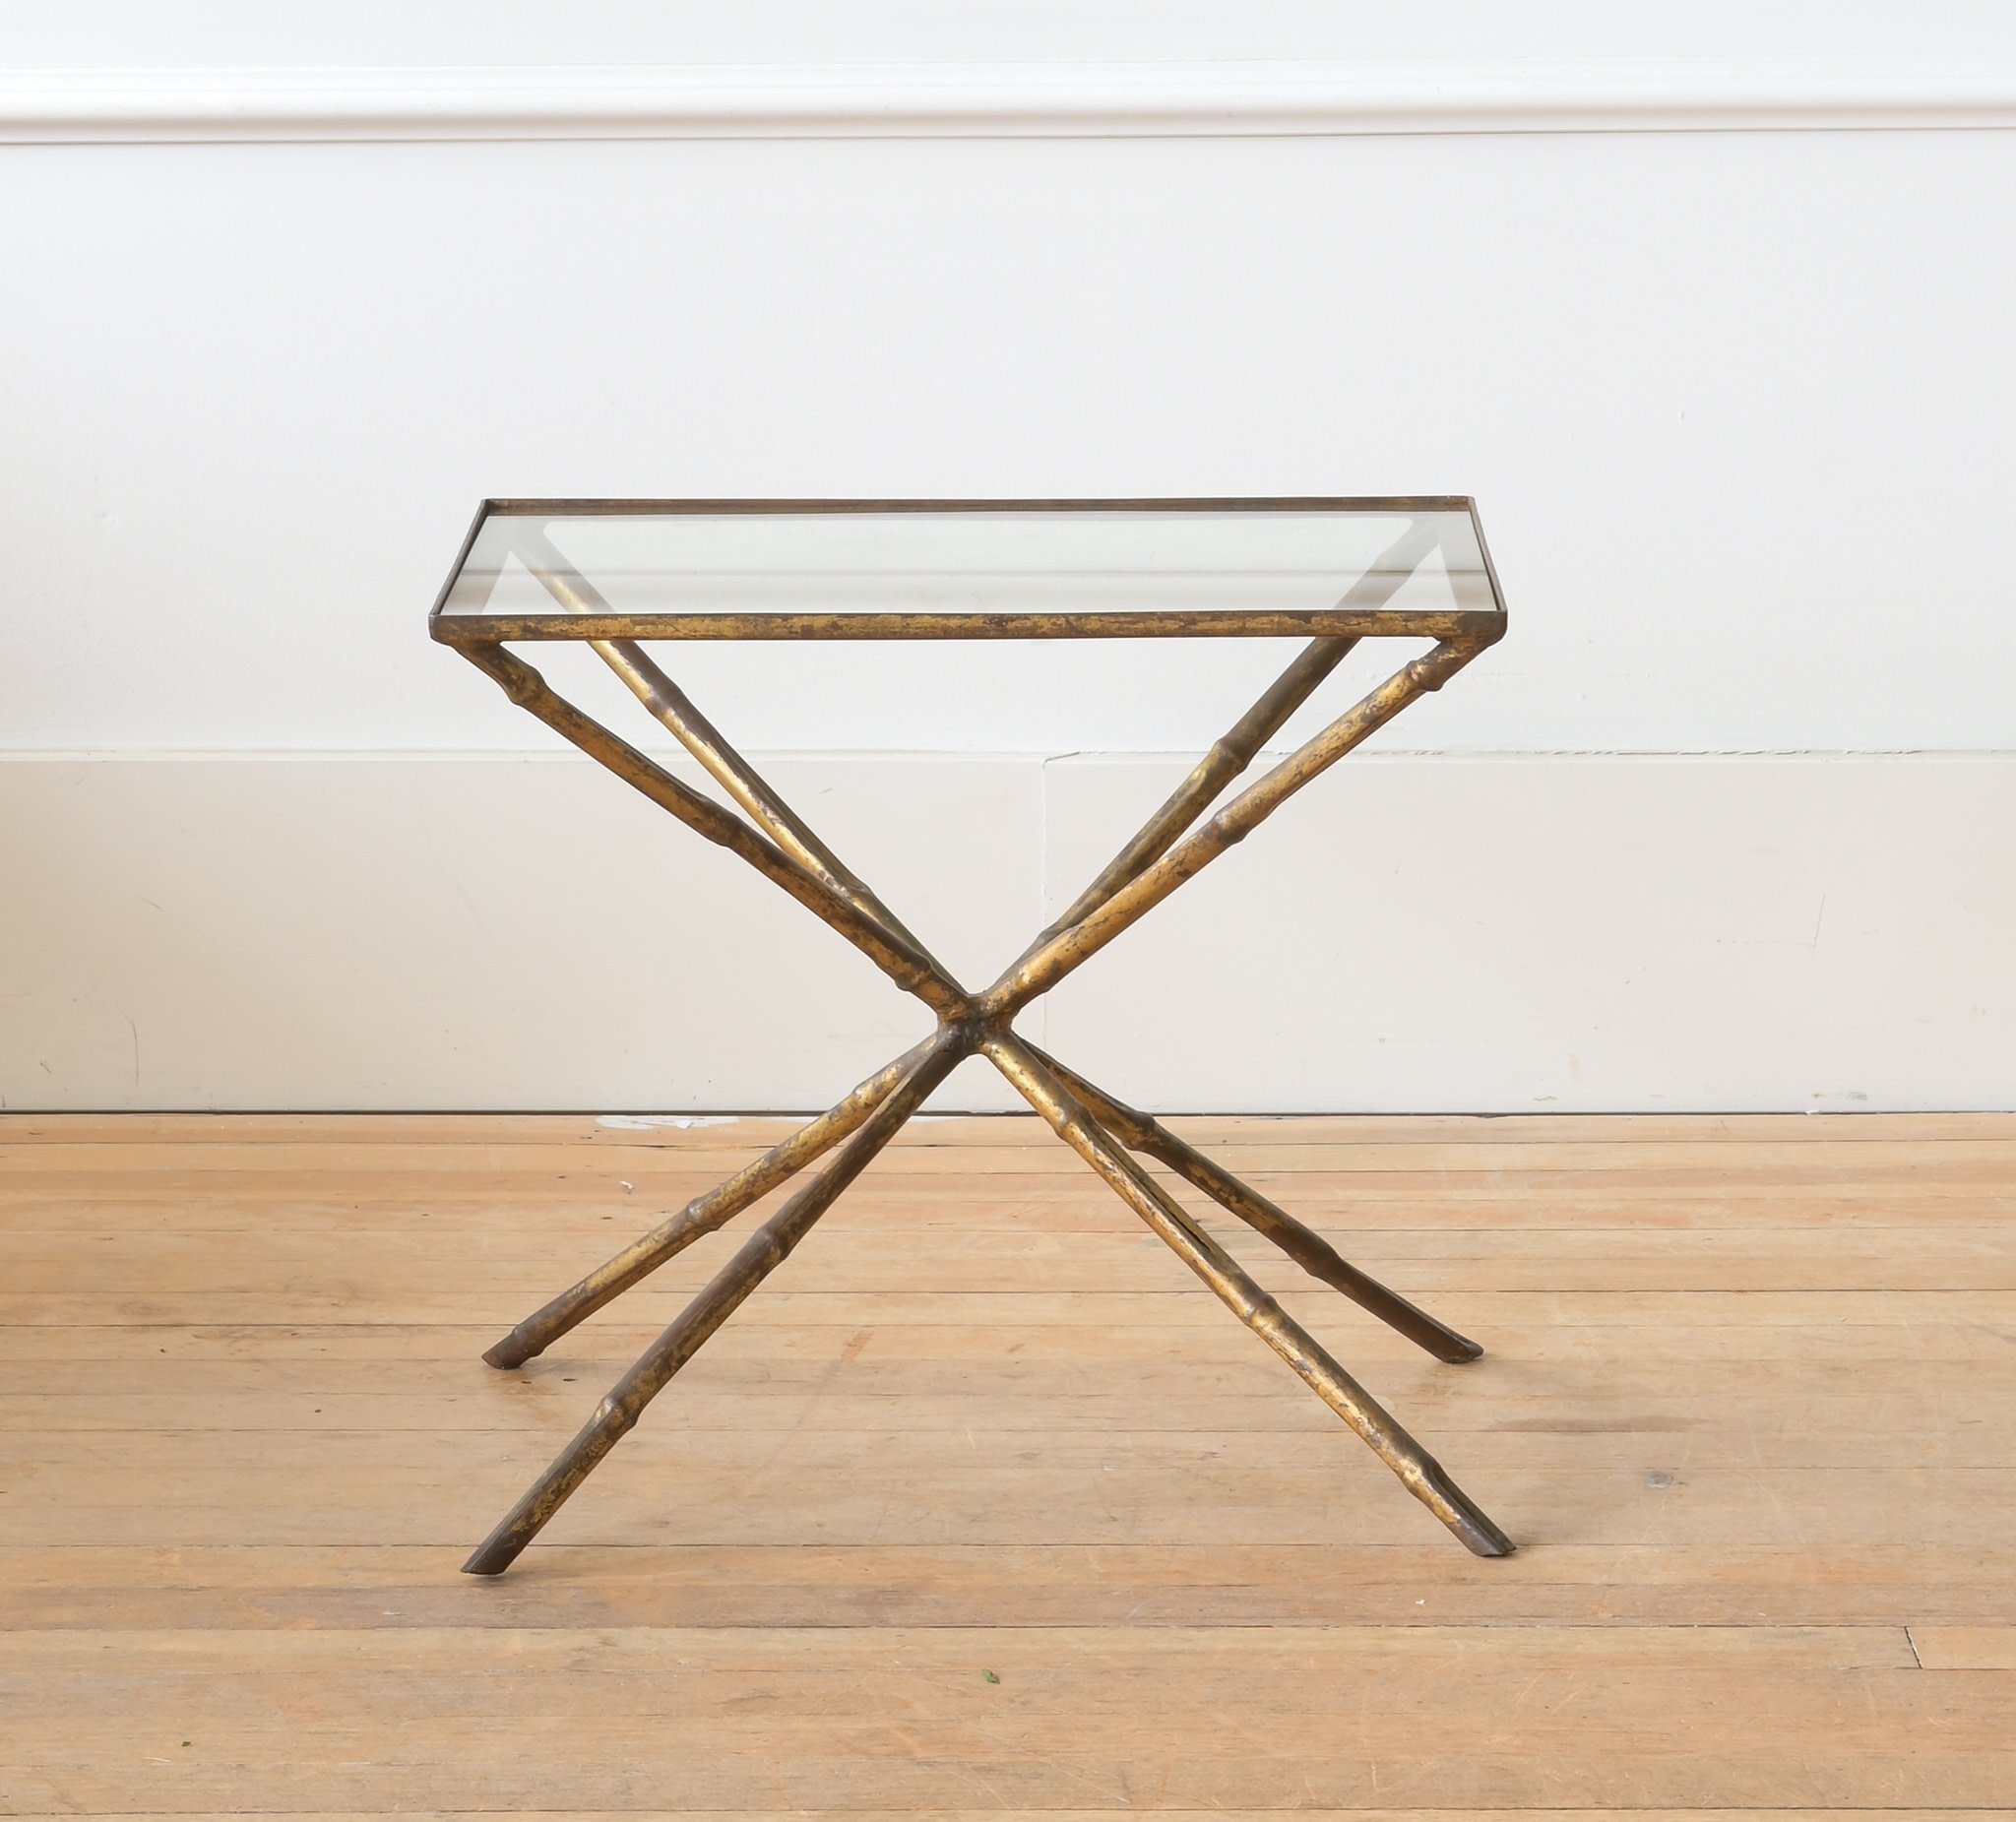 Faux Bamboo Brass Tray Table with Folding Base.